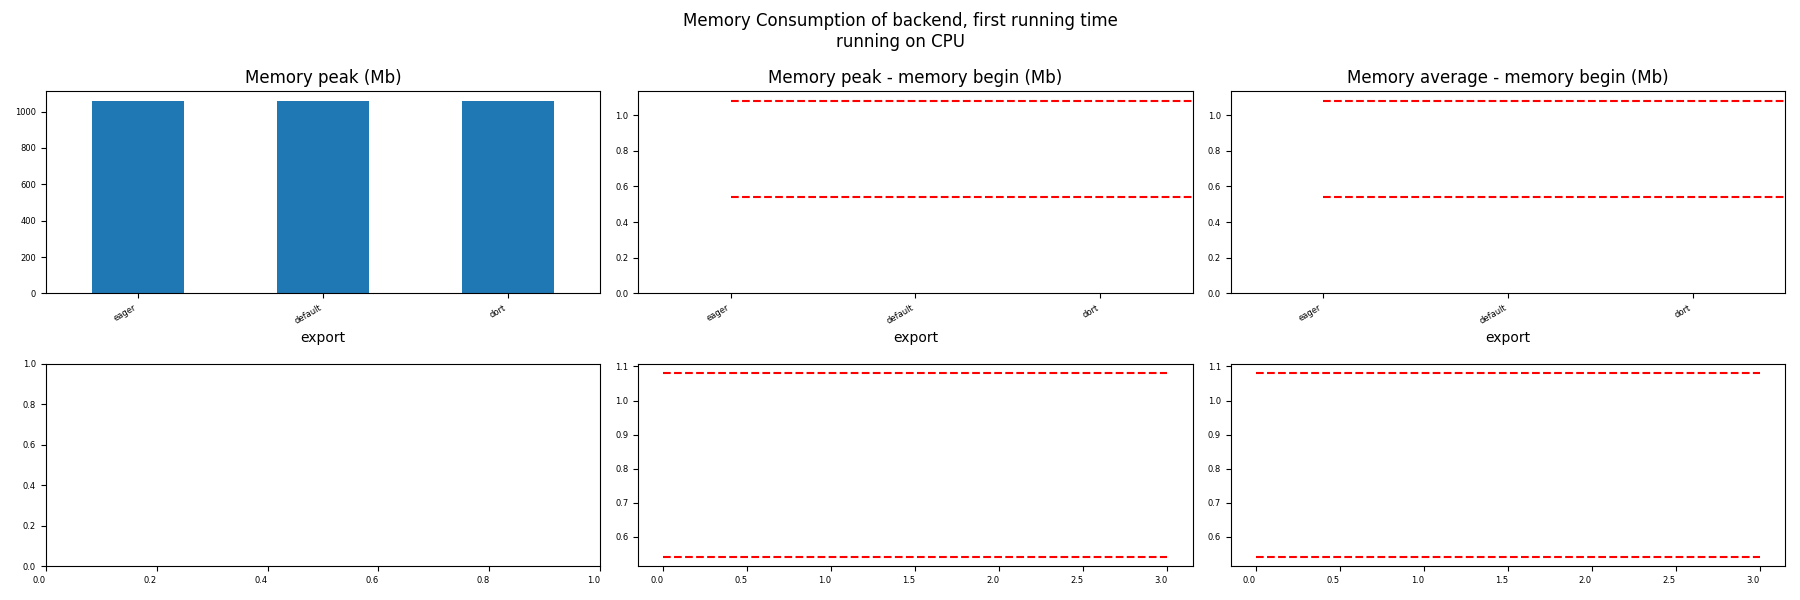 Memory Consumption of backend, first running time running on CPU, Memory peak (Mb), Memory peak - memory begin (Mb), Memory average - memory begin (Mb)